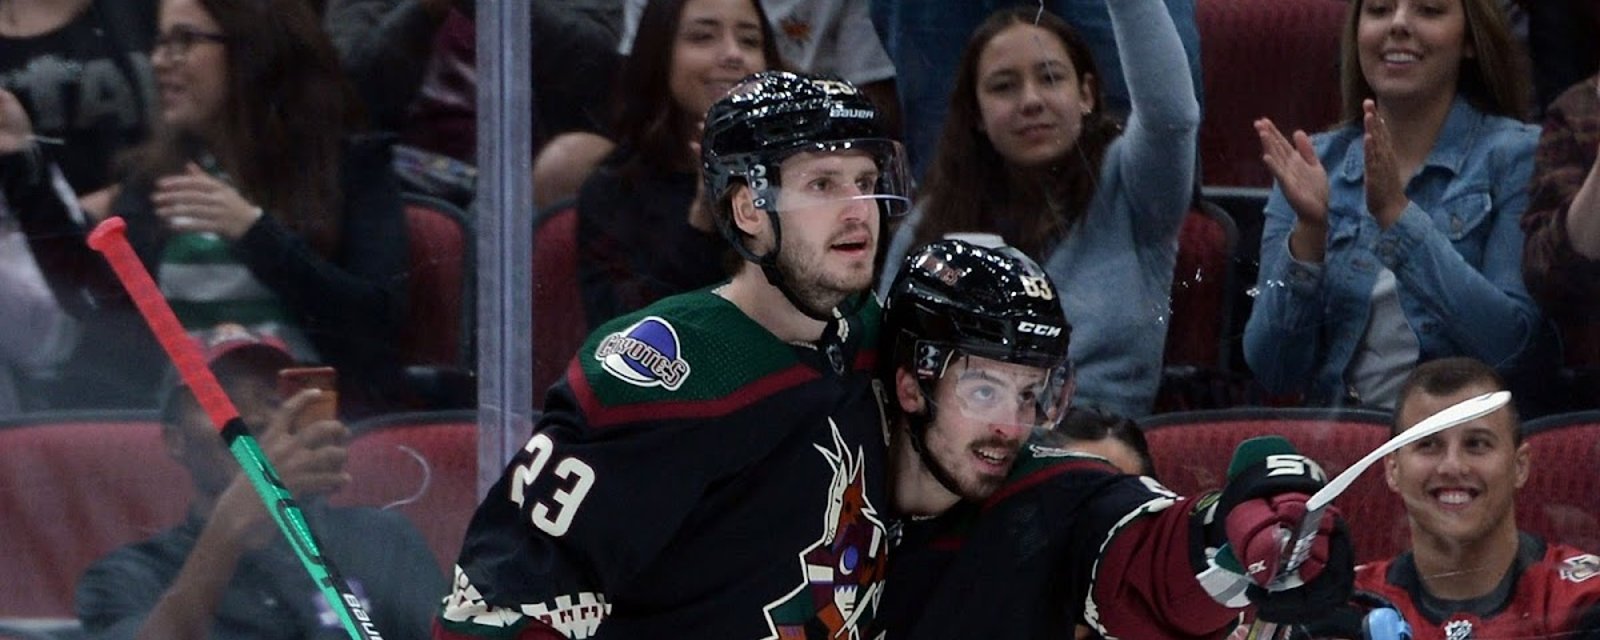 Multi-player monster trade between Canucks and Coyotes which includes 1st round pick tonight! 